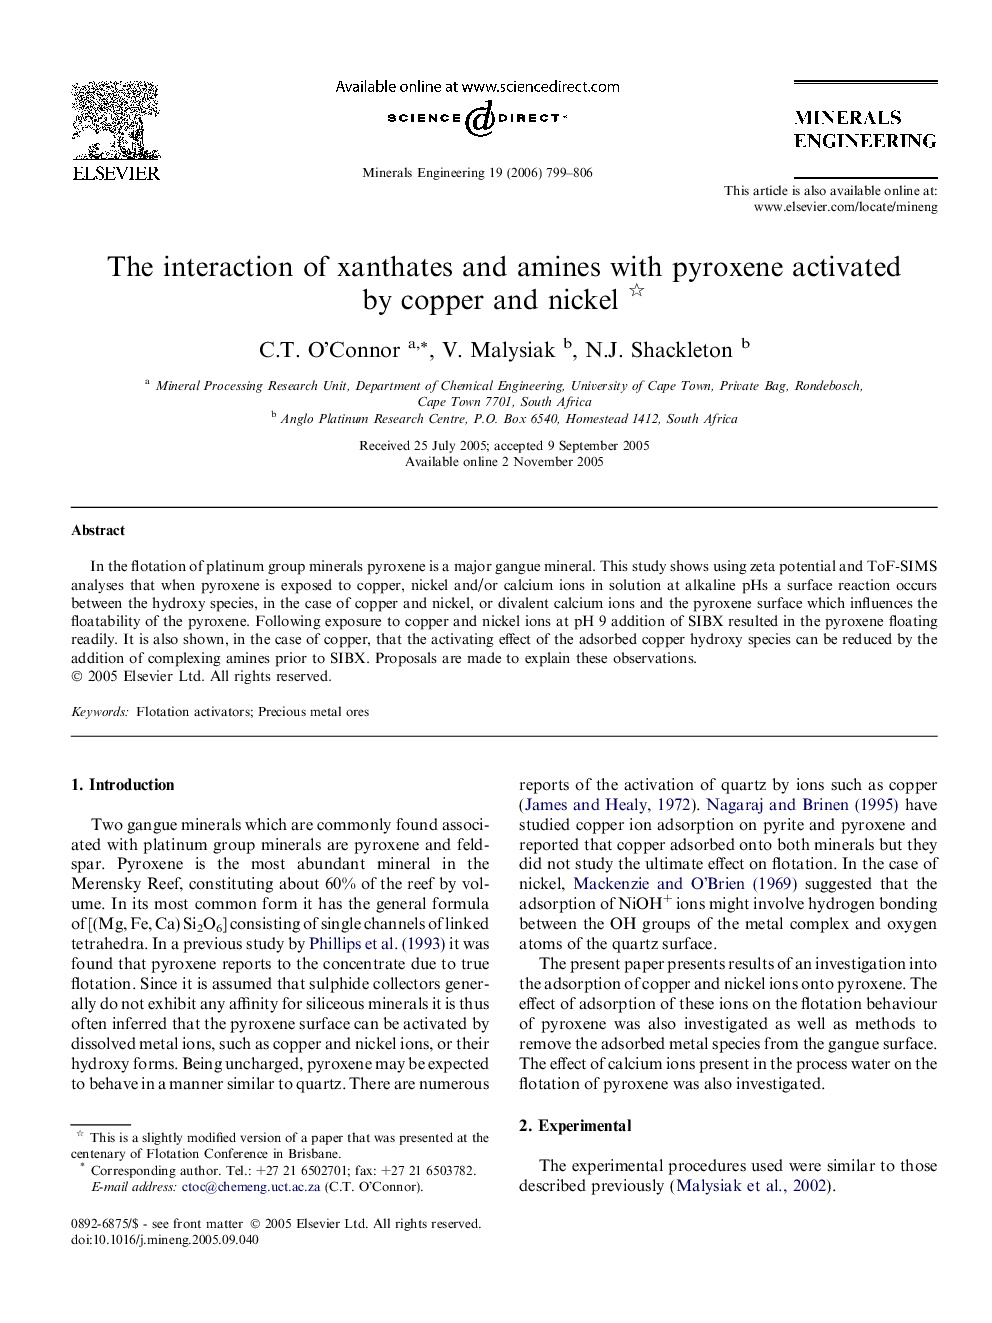 The interaction of xanthates and amines with pyroxene activated by copper and nickel 